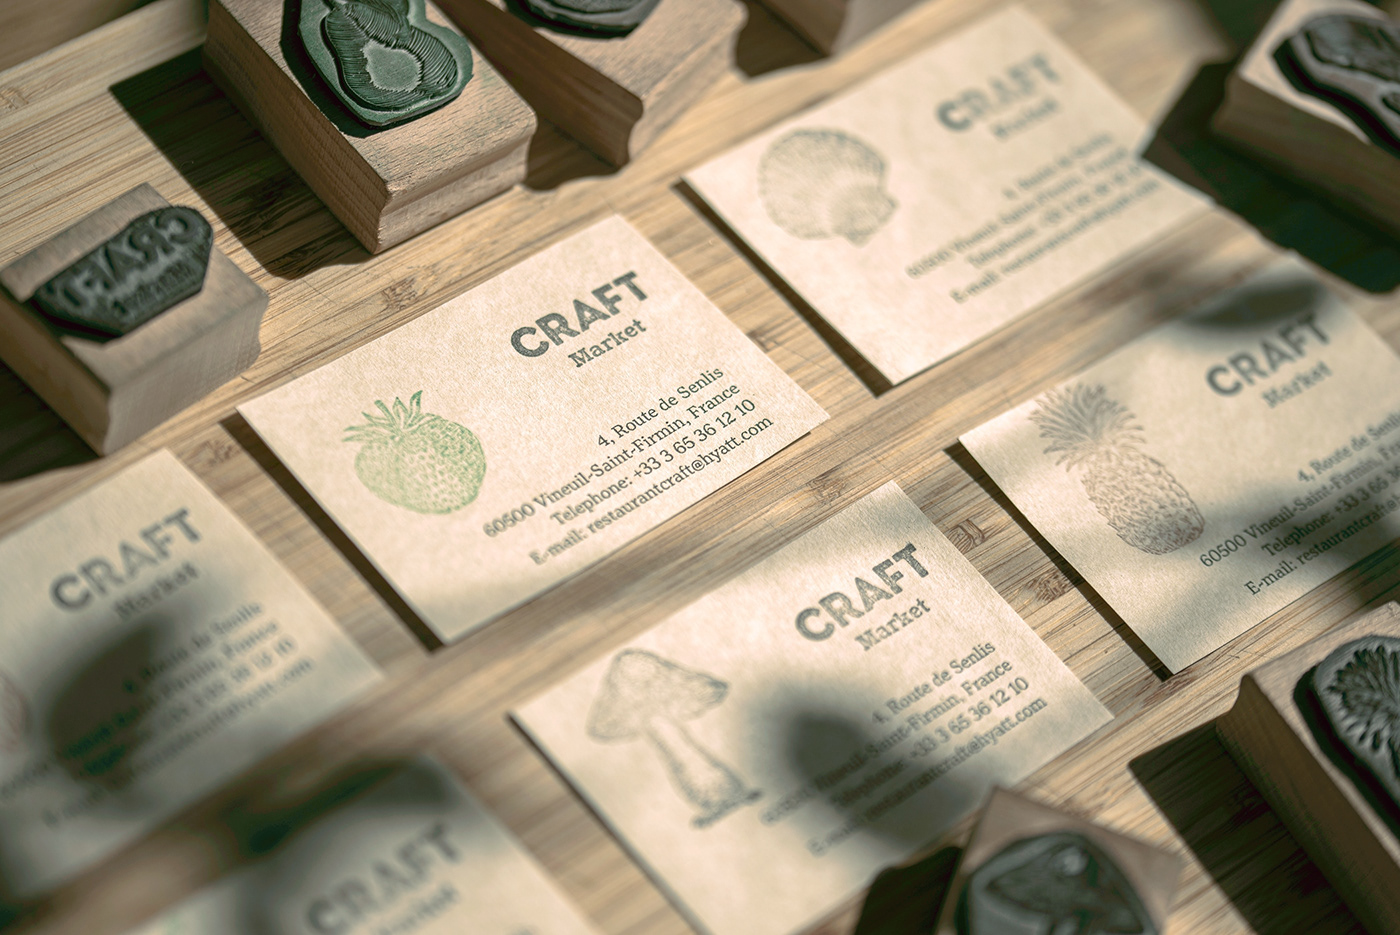 Closeup of CRAFT Market cards, including several rubber stamps with food ingredients on.